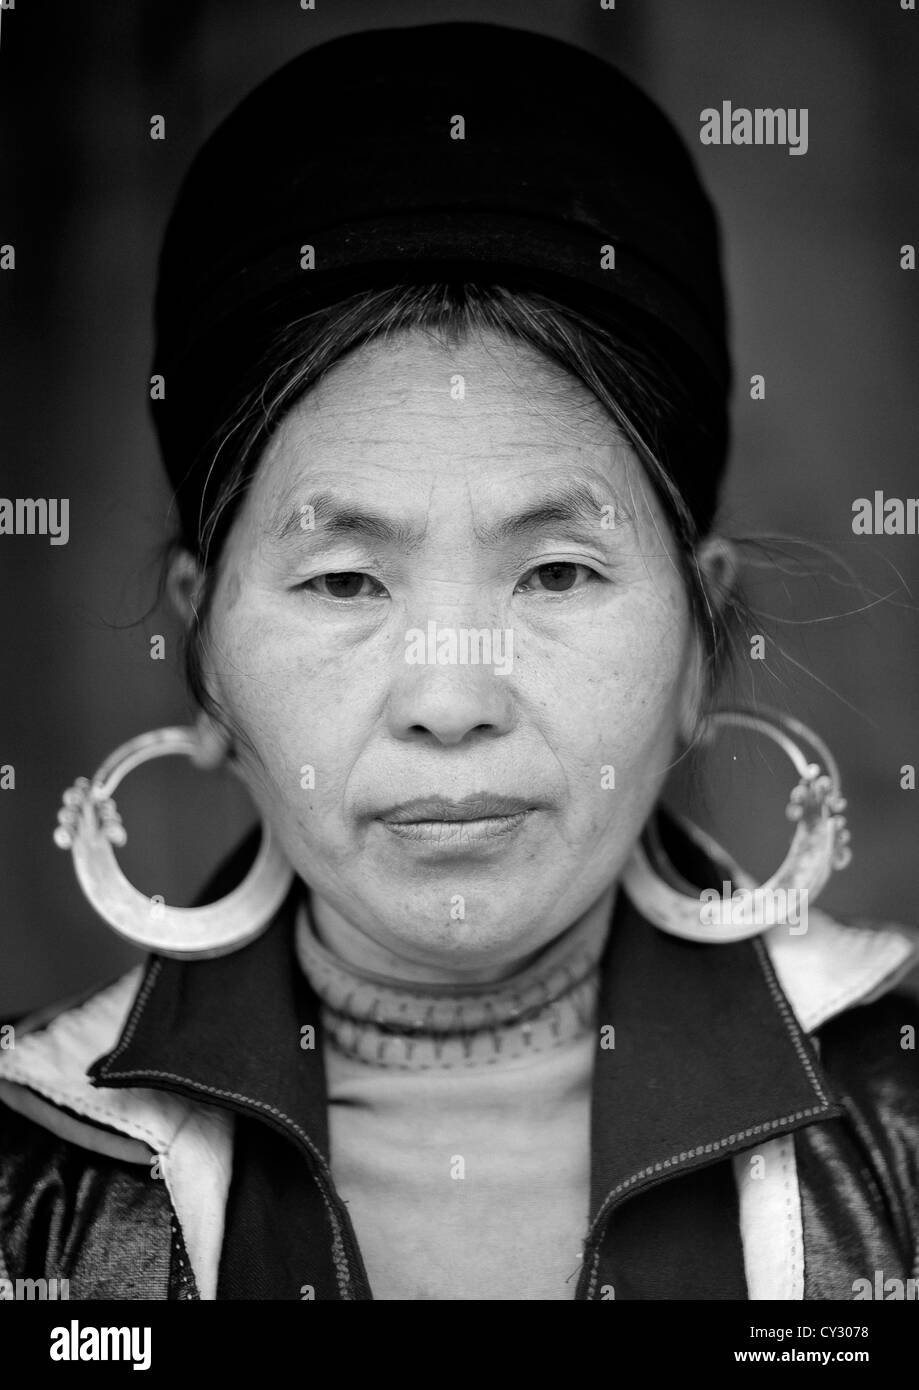 Black Hmong Woman With Traditional Headgear And Earrings, Sapa, Vietnam Stock Photo